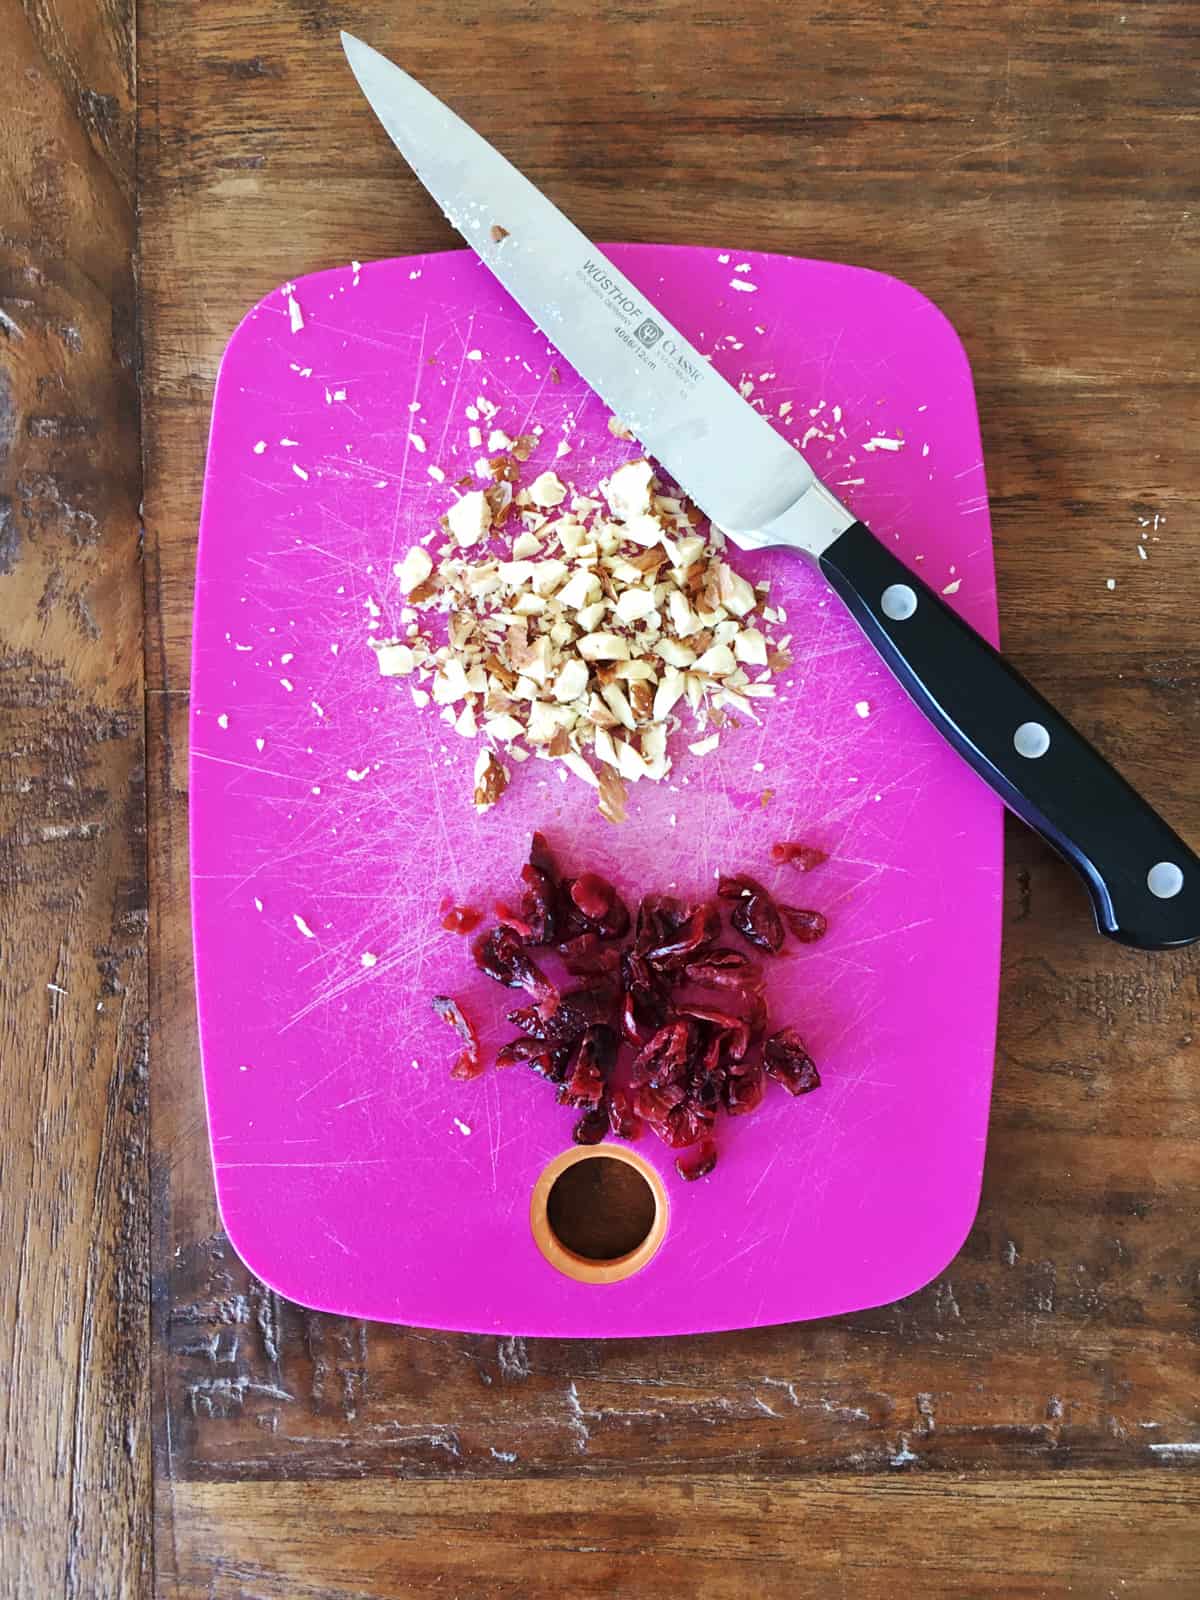 Chopped almonds and dried cranberries with a sharp knife on a purple cutting board.